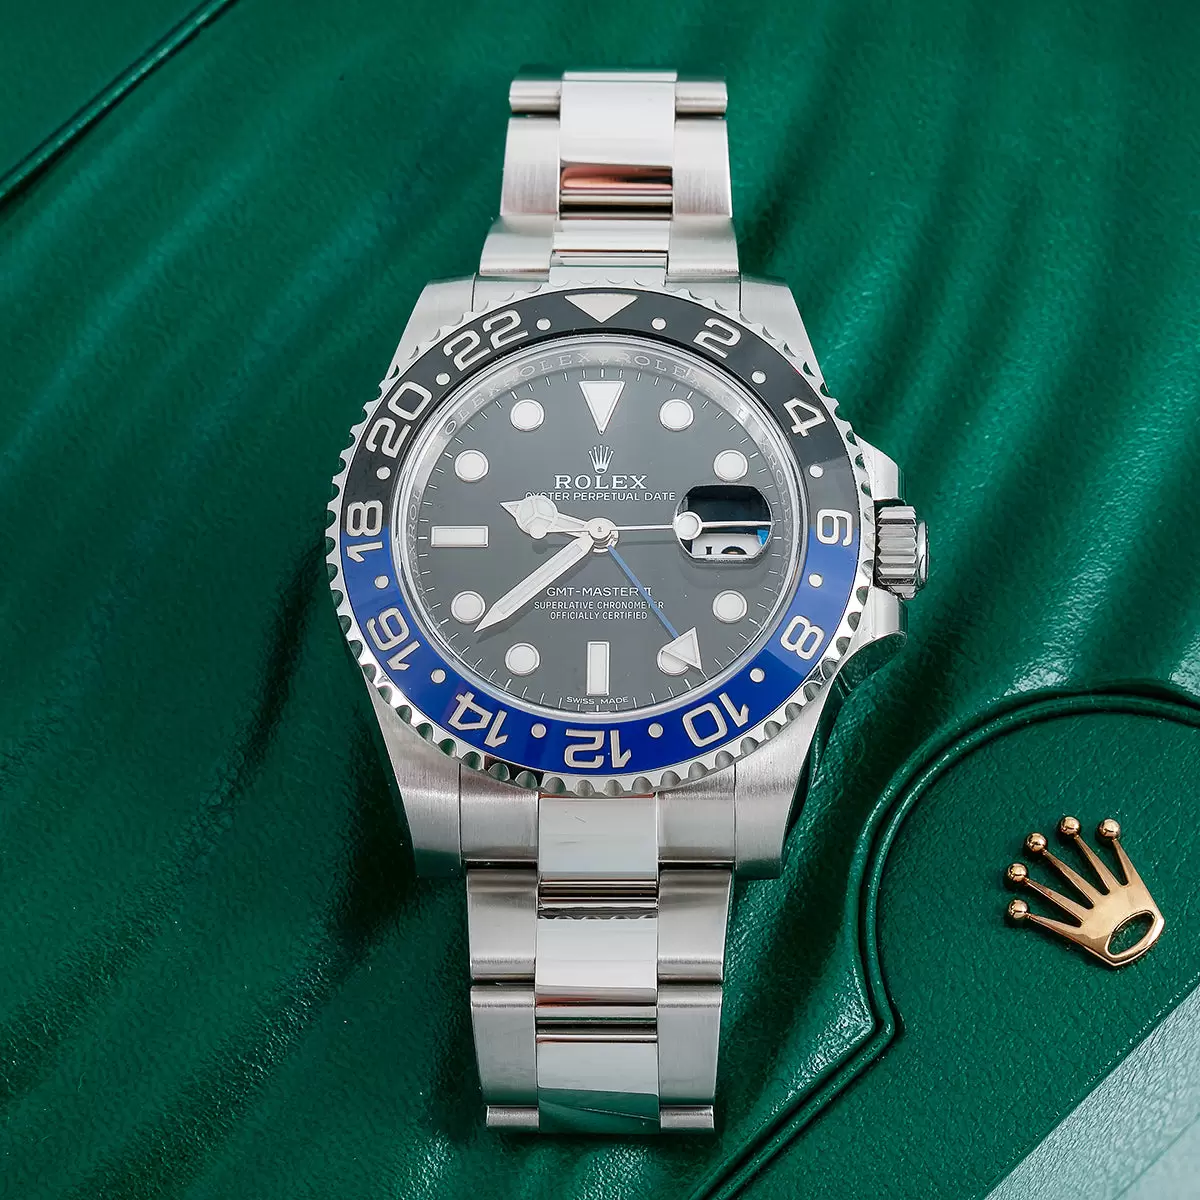 $67 Rolex Replica Watches, Best Fake Rolex With Genuine Movement Sale Online – exact replica watches